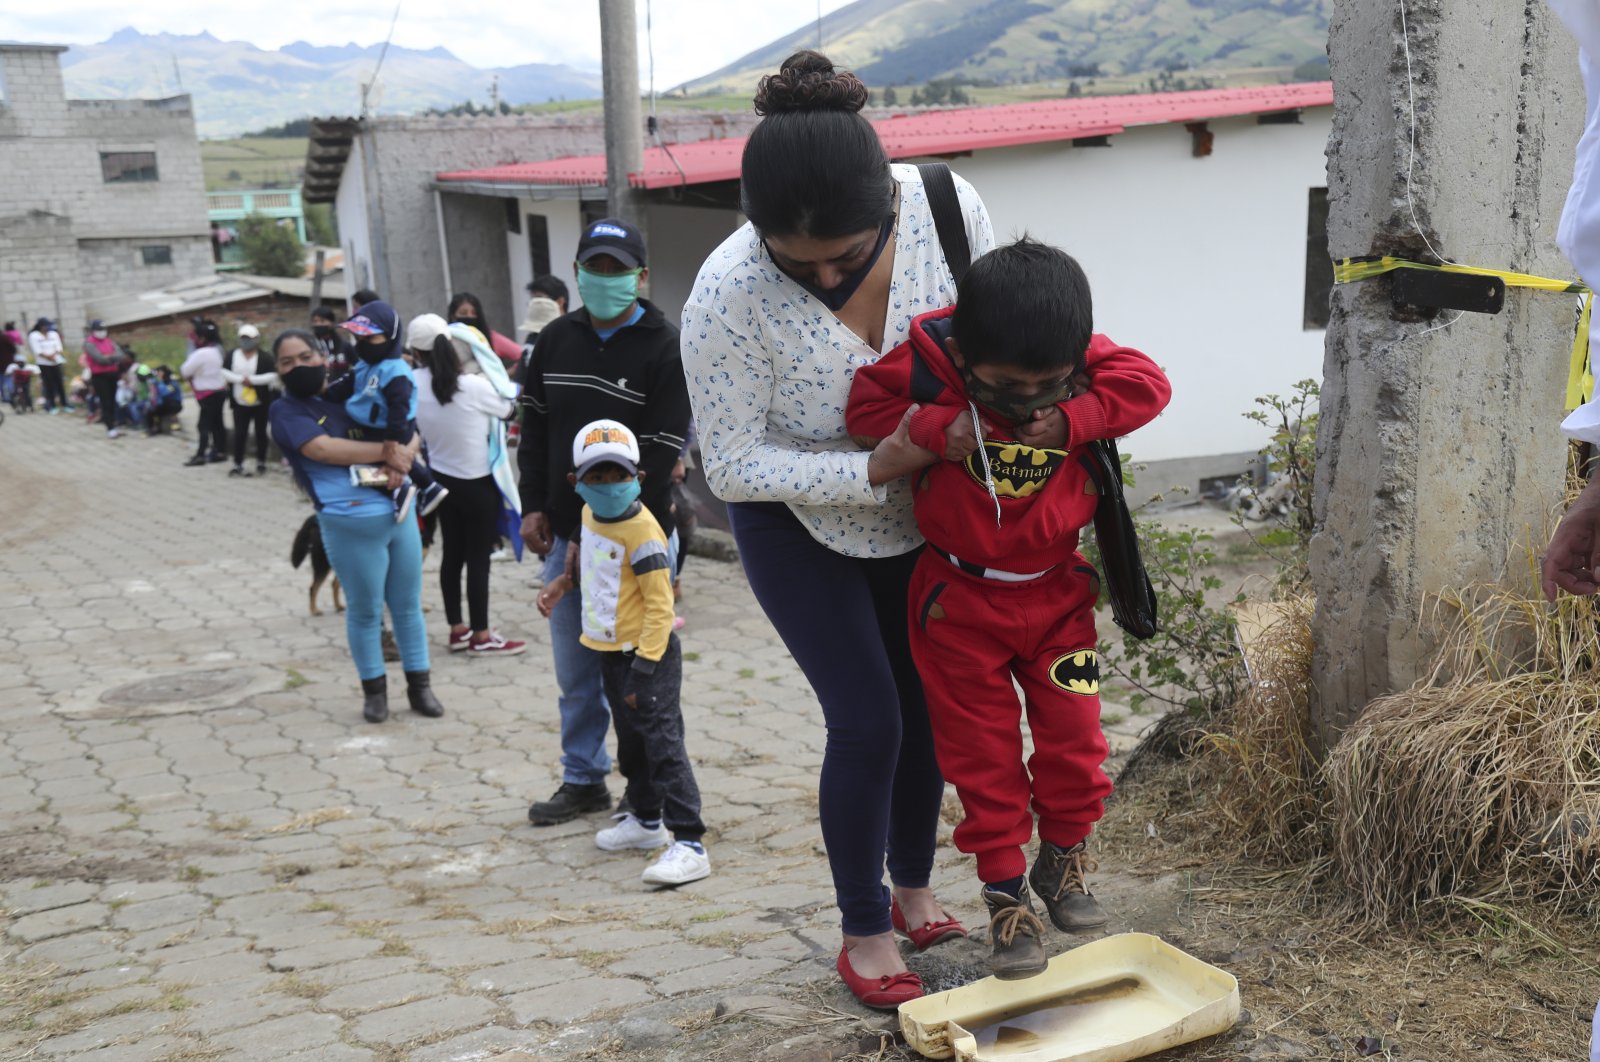 A woman helps her son to disinfect his shoes before entering the Cariacu stadium, Ecuador, June 17, 2020. (AP Photo)